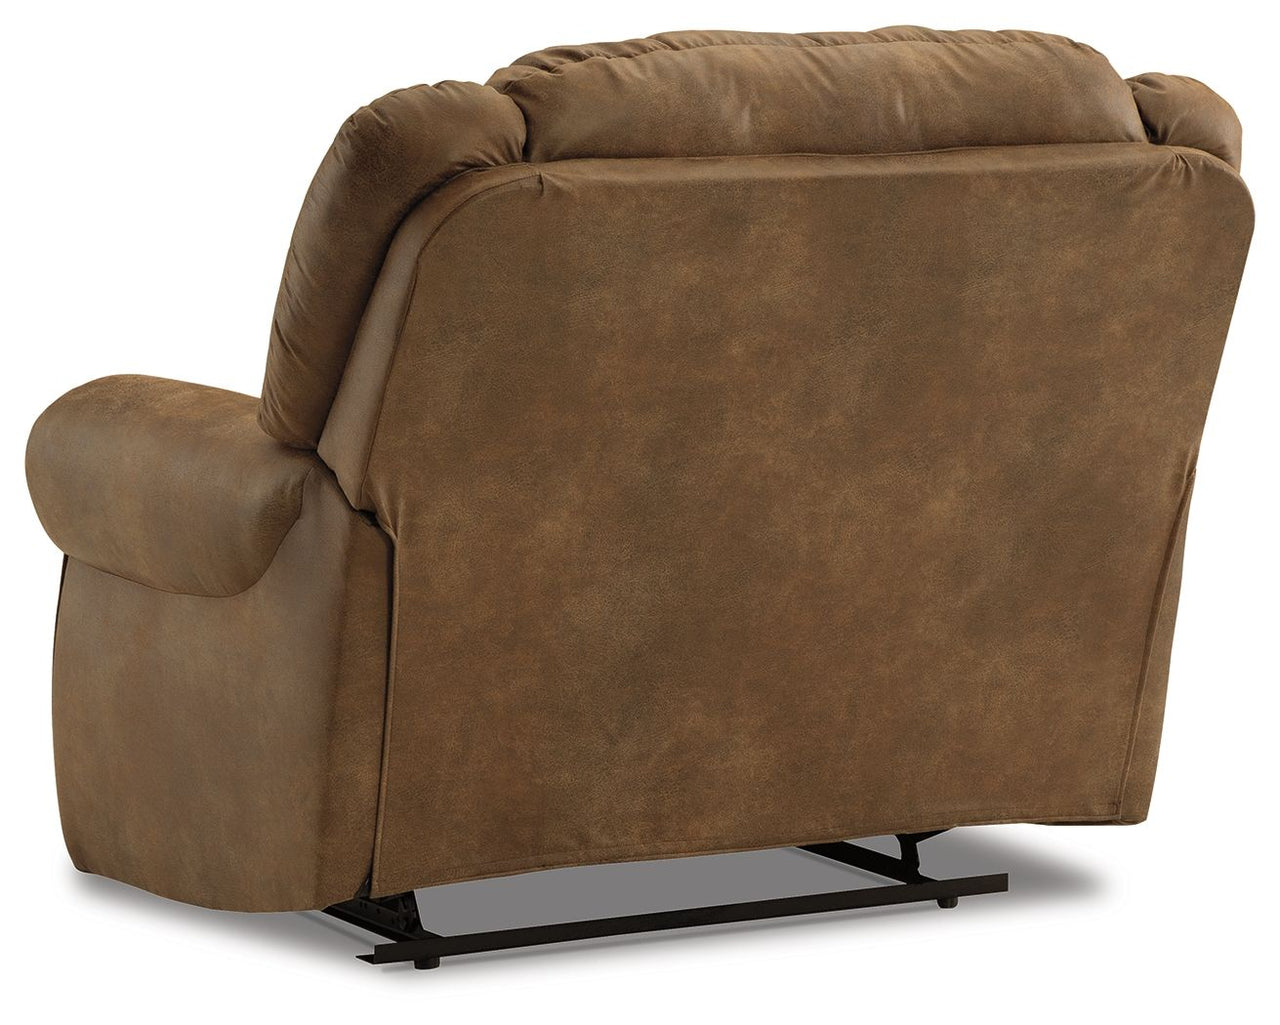 Boothbay - Wide Seat Recliner - Tony's Home Furnishings